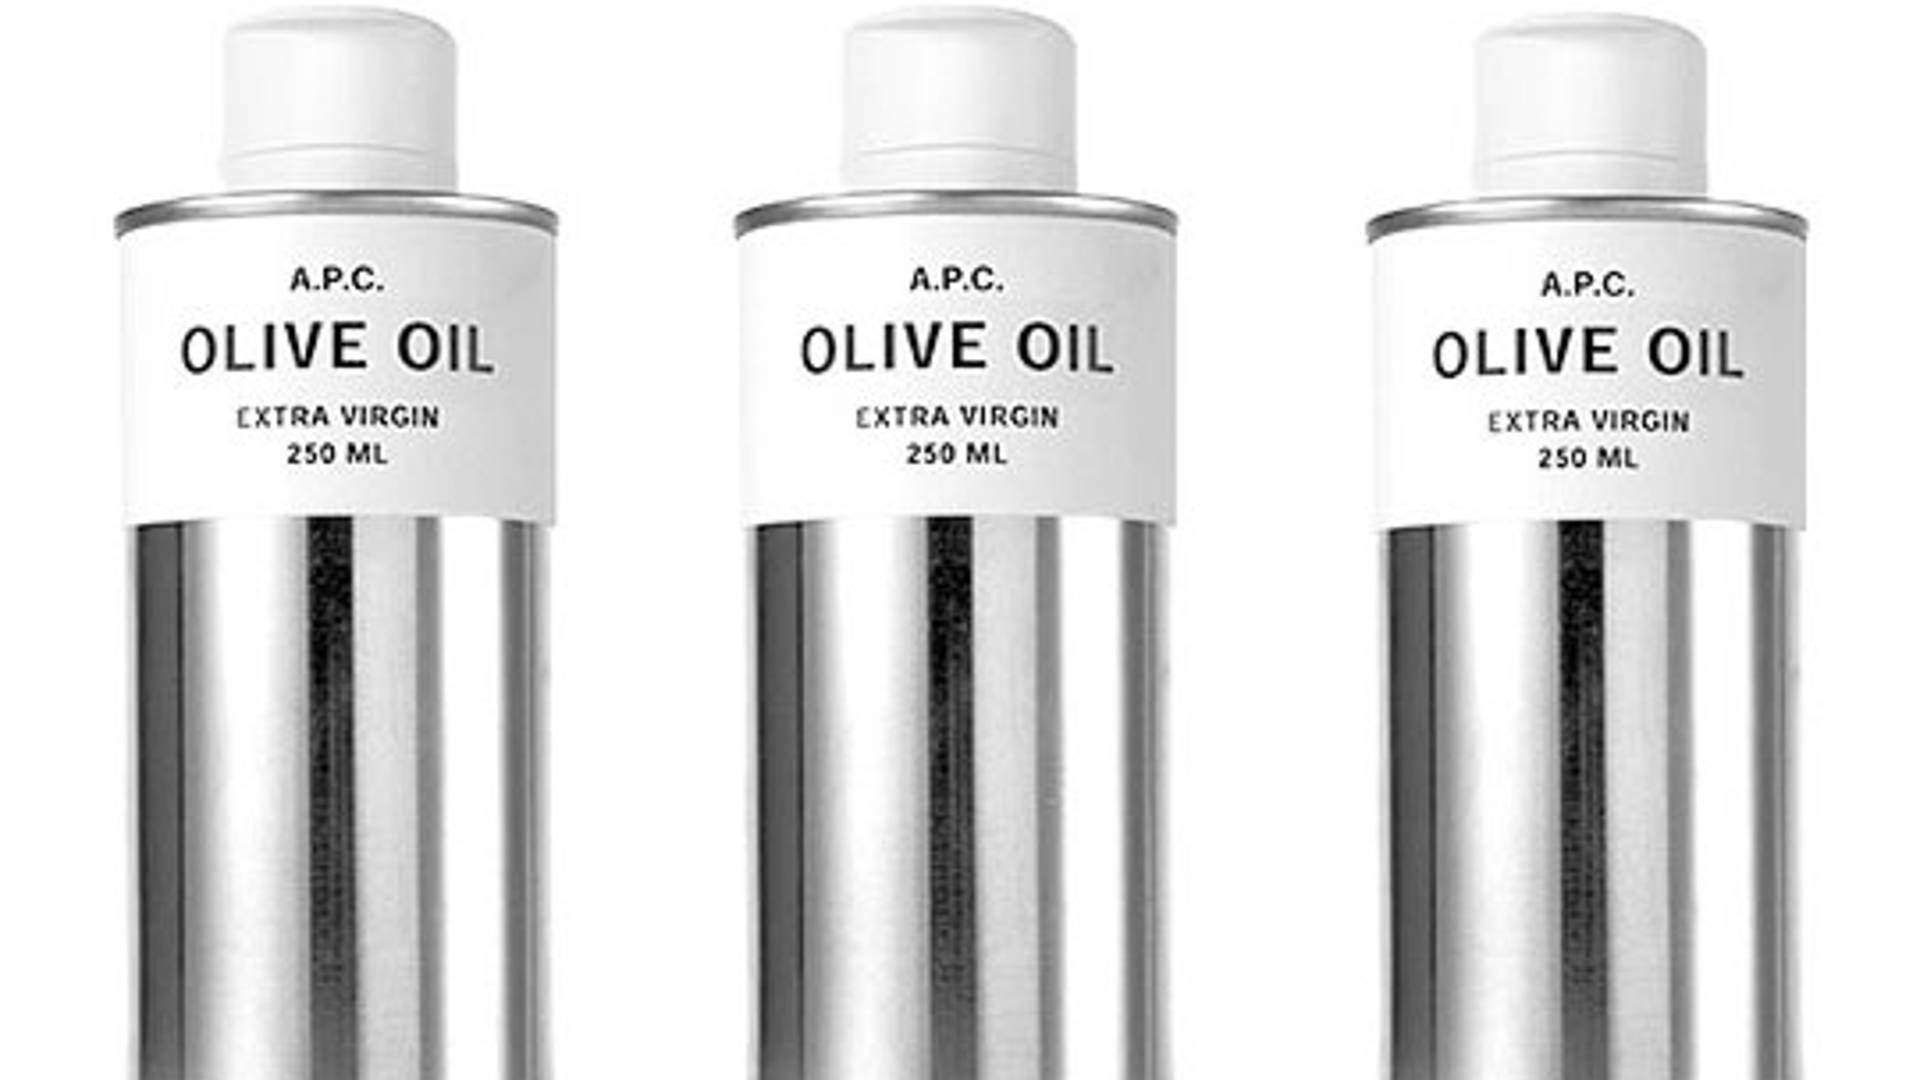 Featured image for A.P.C. Olive Oil